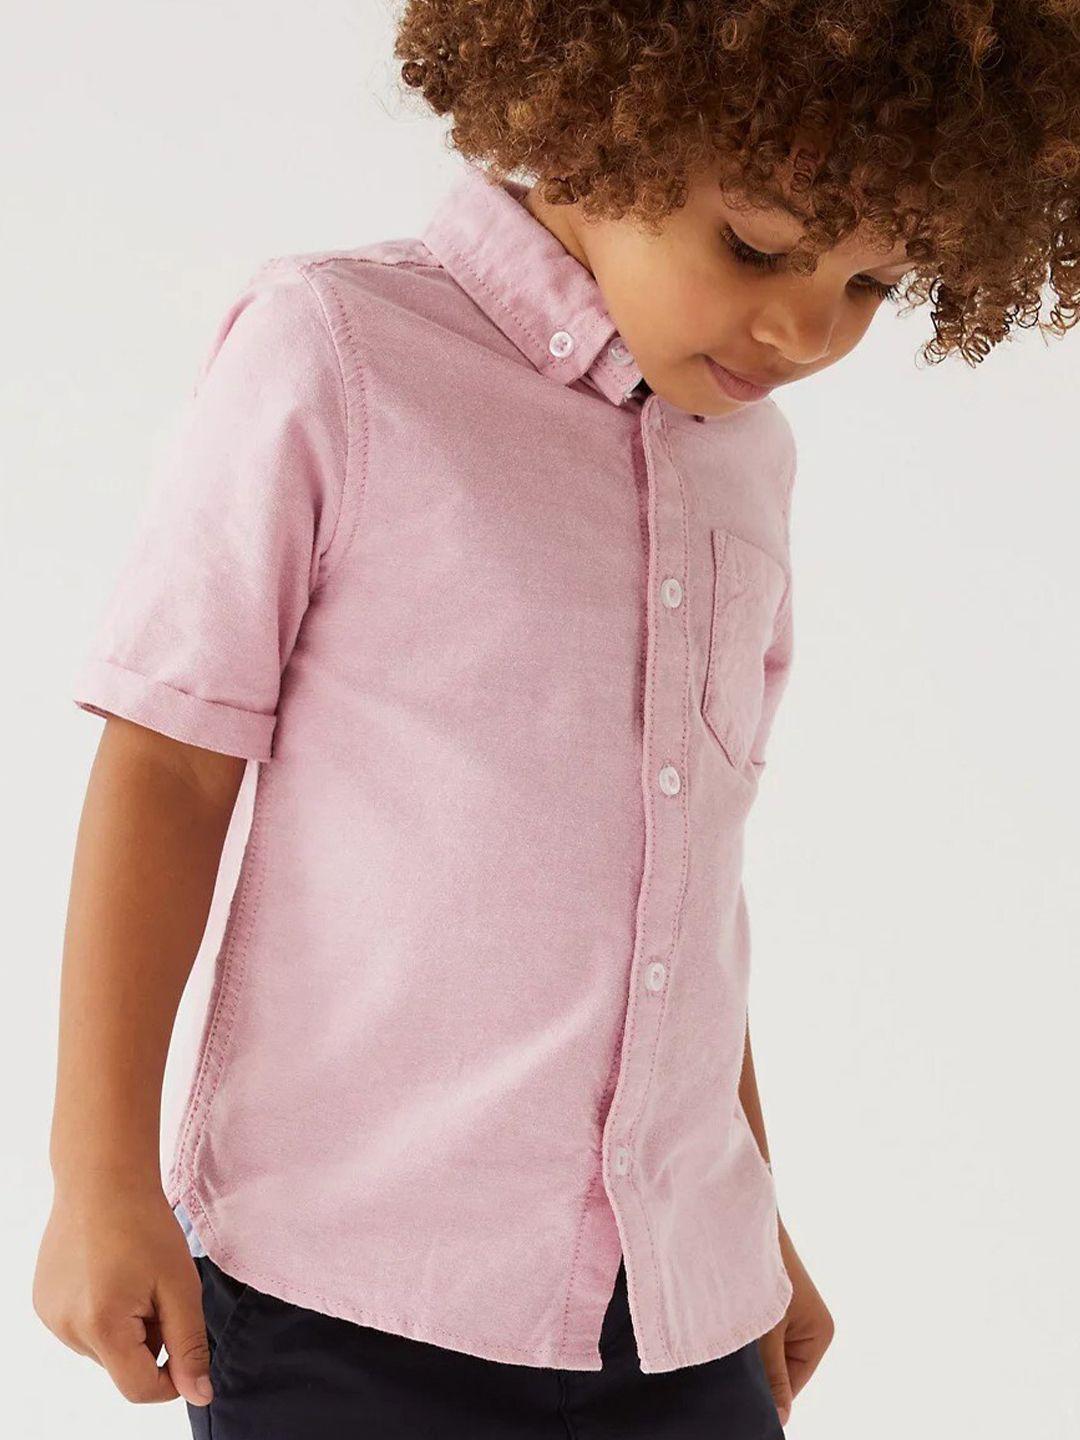 marks & spencer boys oxford casual pure cotton shirt